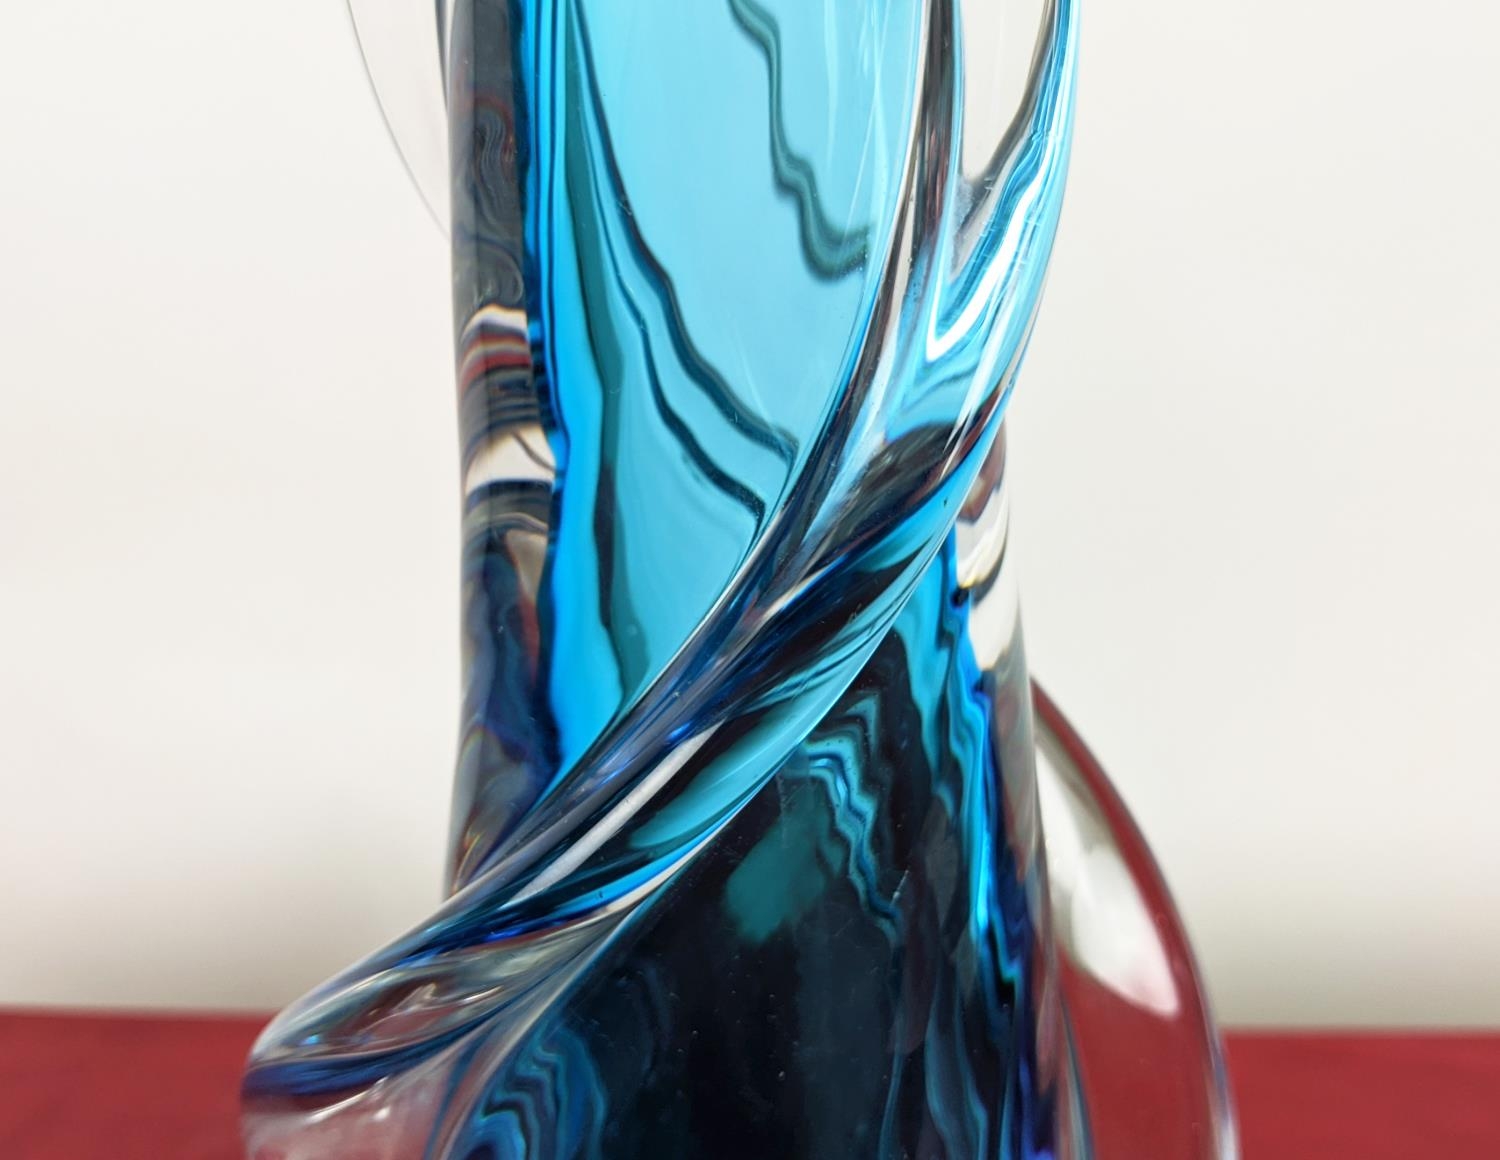 PAOLO MOSCHINO TABLE LAMP, twisted blue glass design, 53cm H. - Image 10 of 11